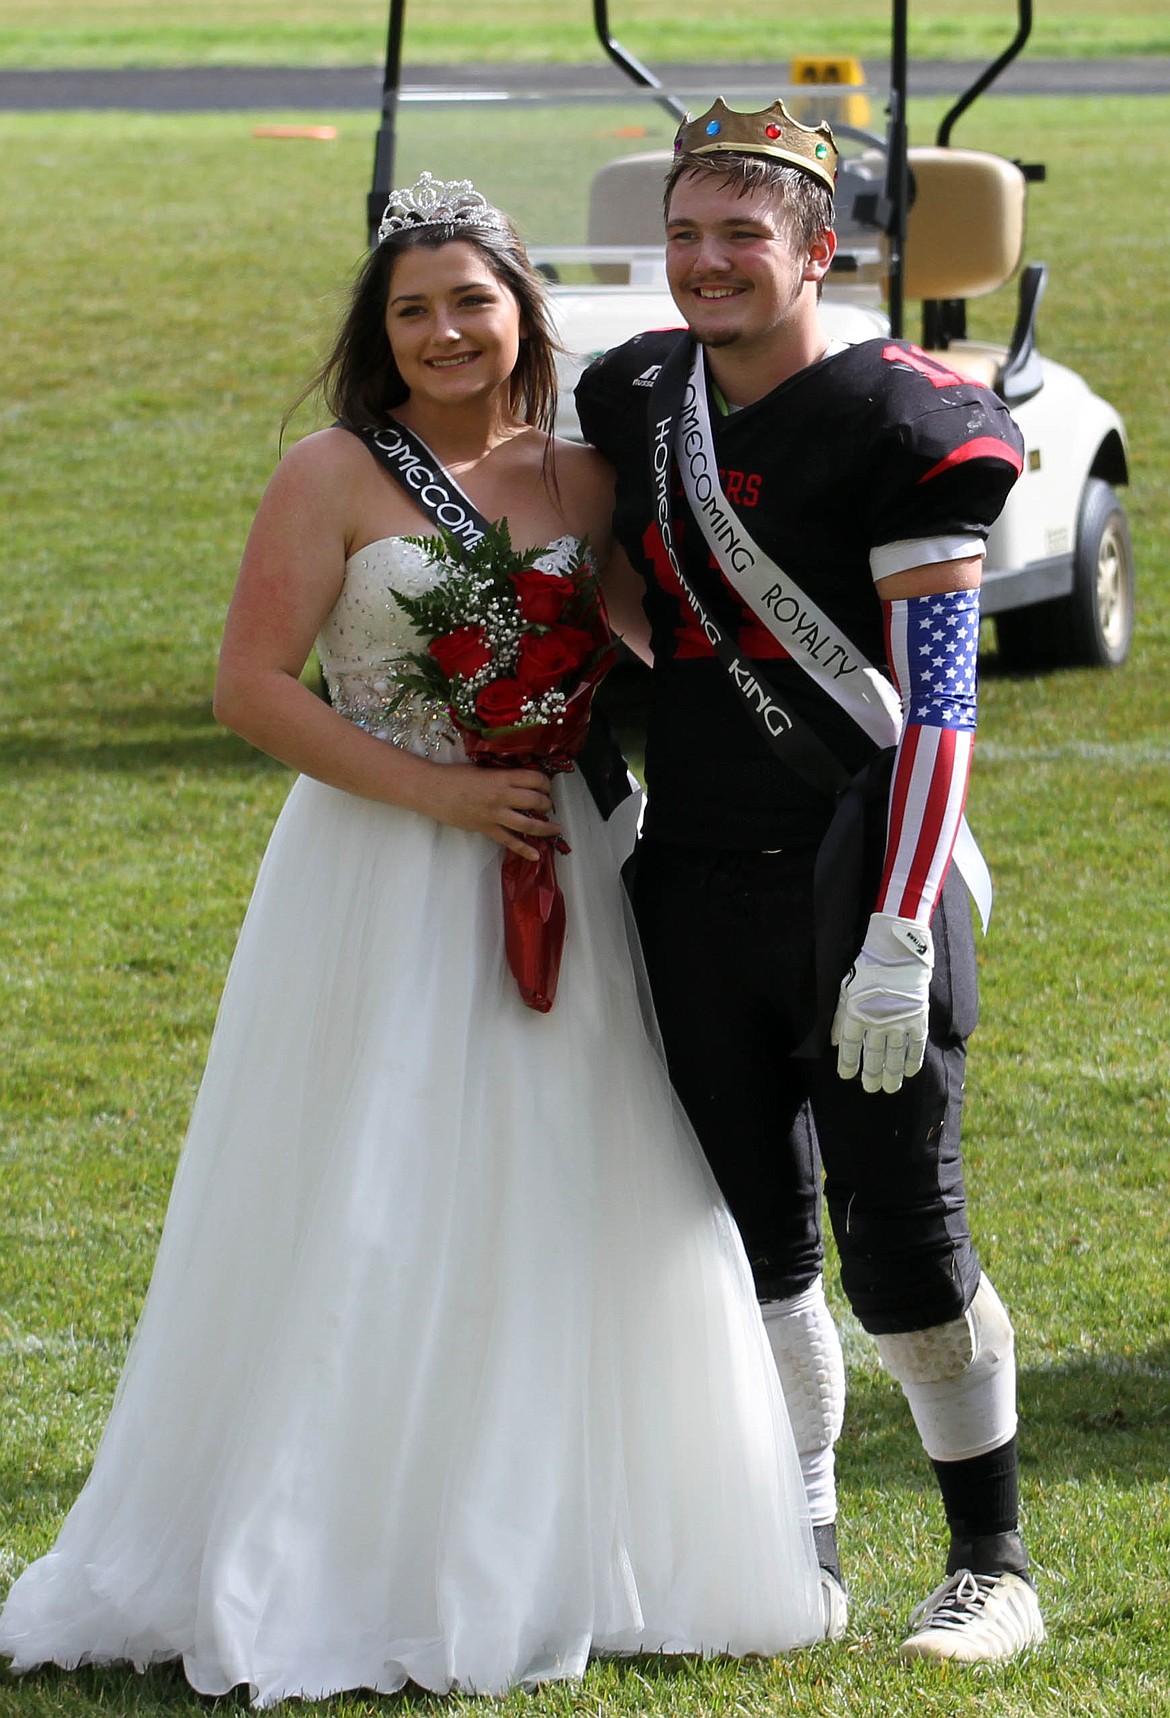 Photo by JOSH MCDONALD
Homecoming queen and king Destiny Angle and Zayne Hunter.